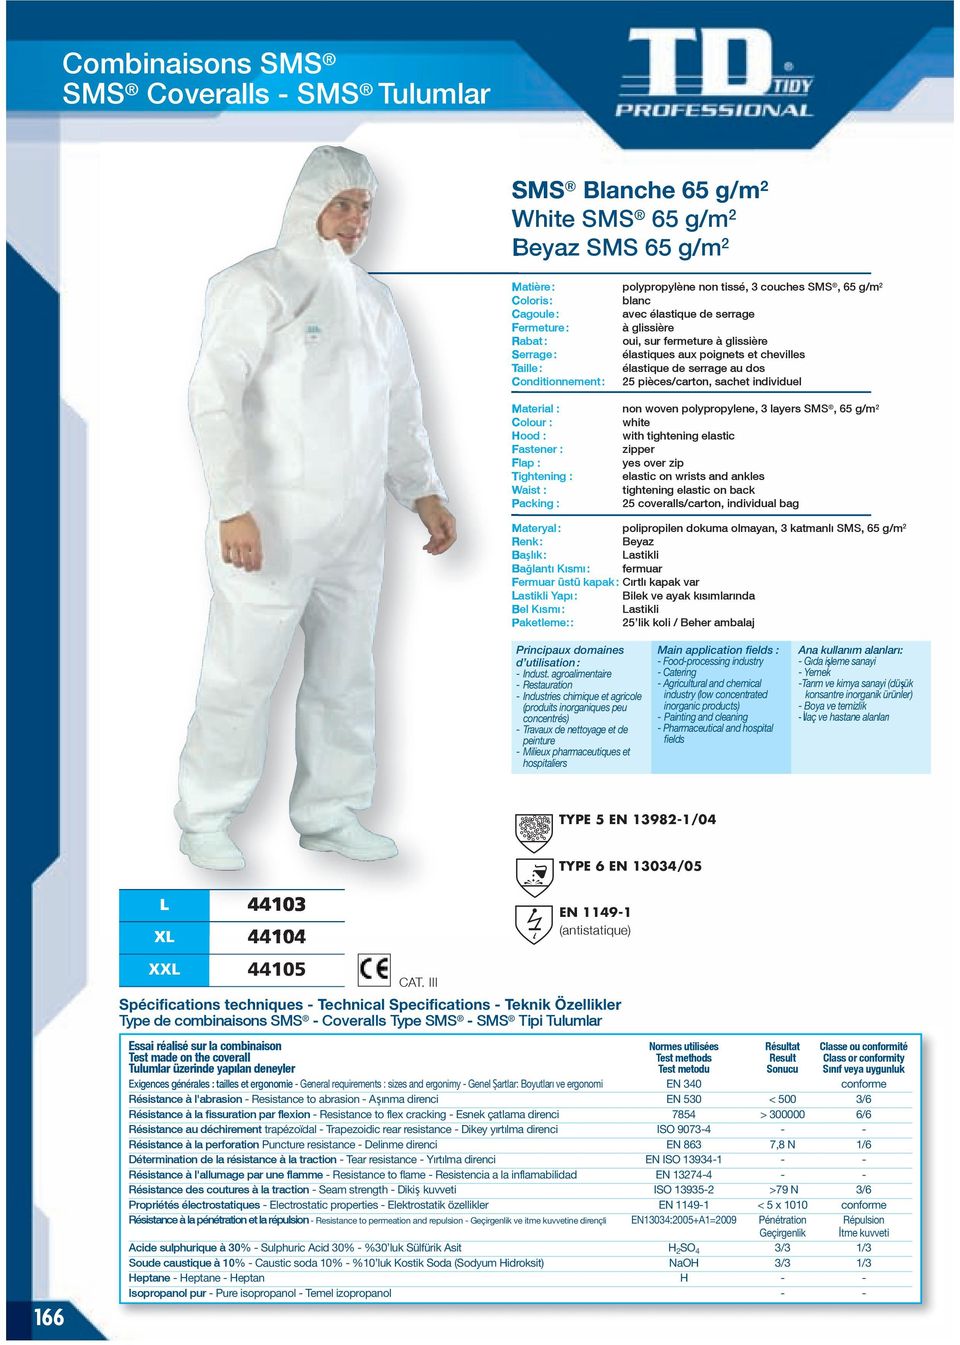 individuel non woven polypropylene, 3 layers SMS, 65 g/m 2 Hood : with tightening elastic Fastener : zipper Flap : yes over zip Tightening : elastic on wrists and ankles Waist : tightening elastic on